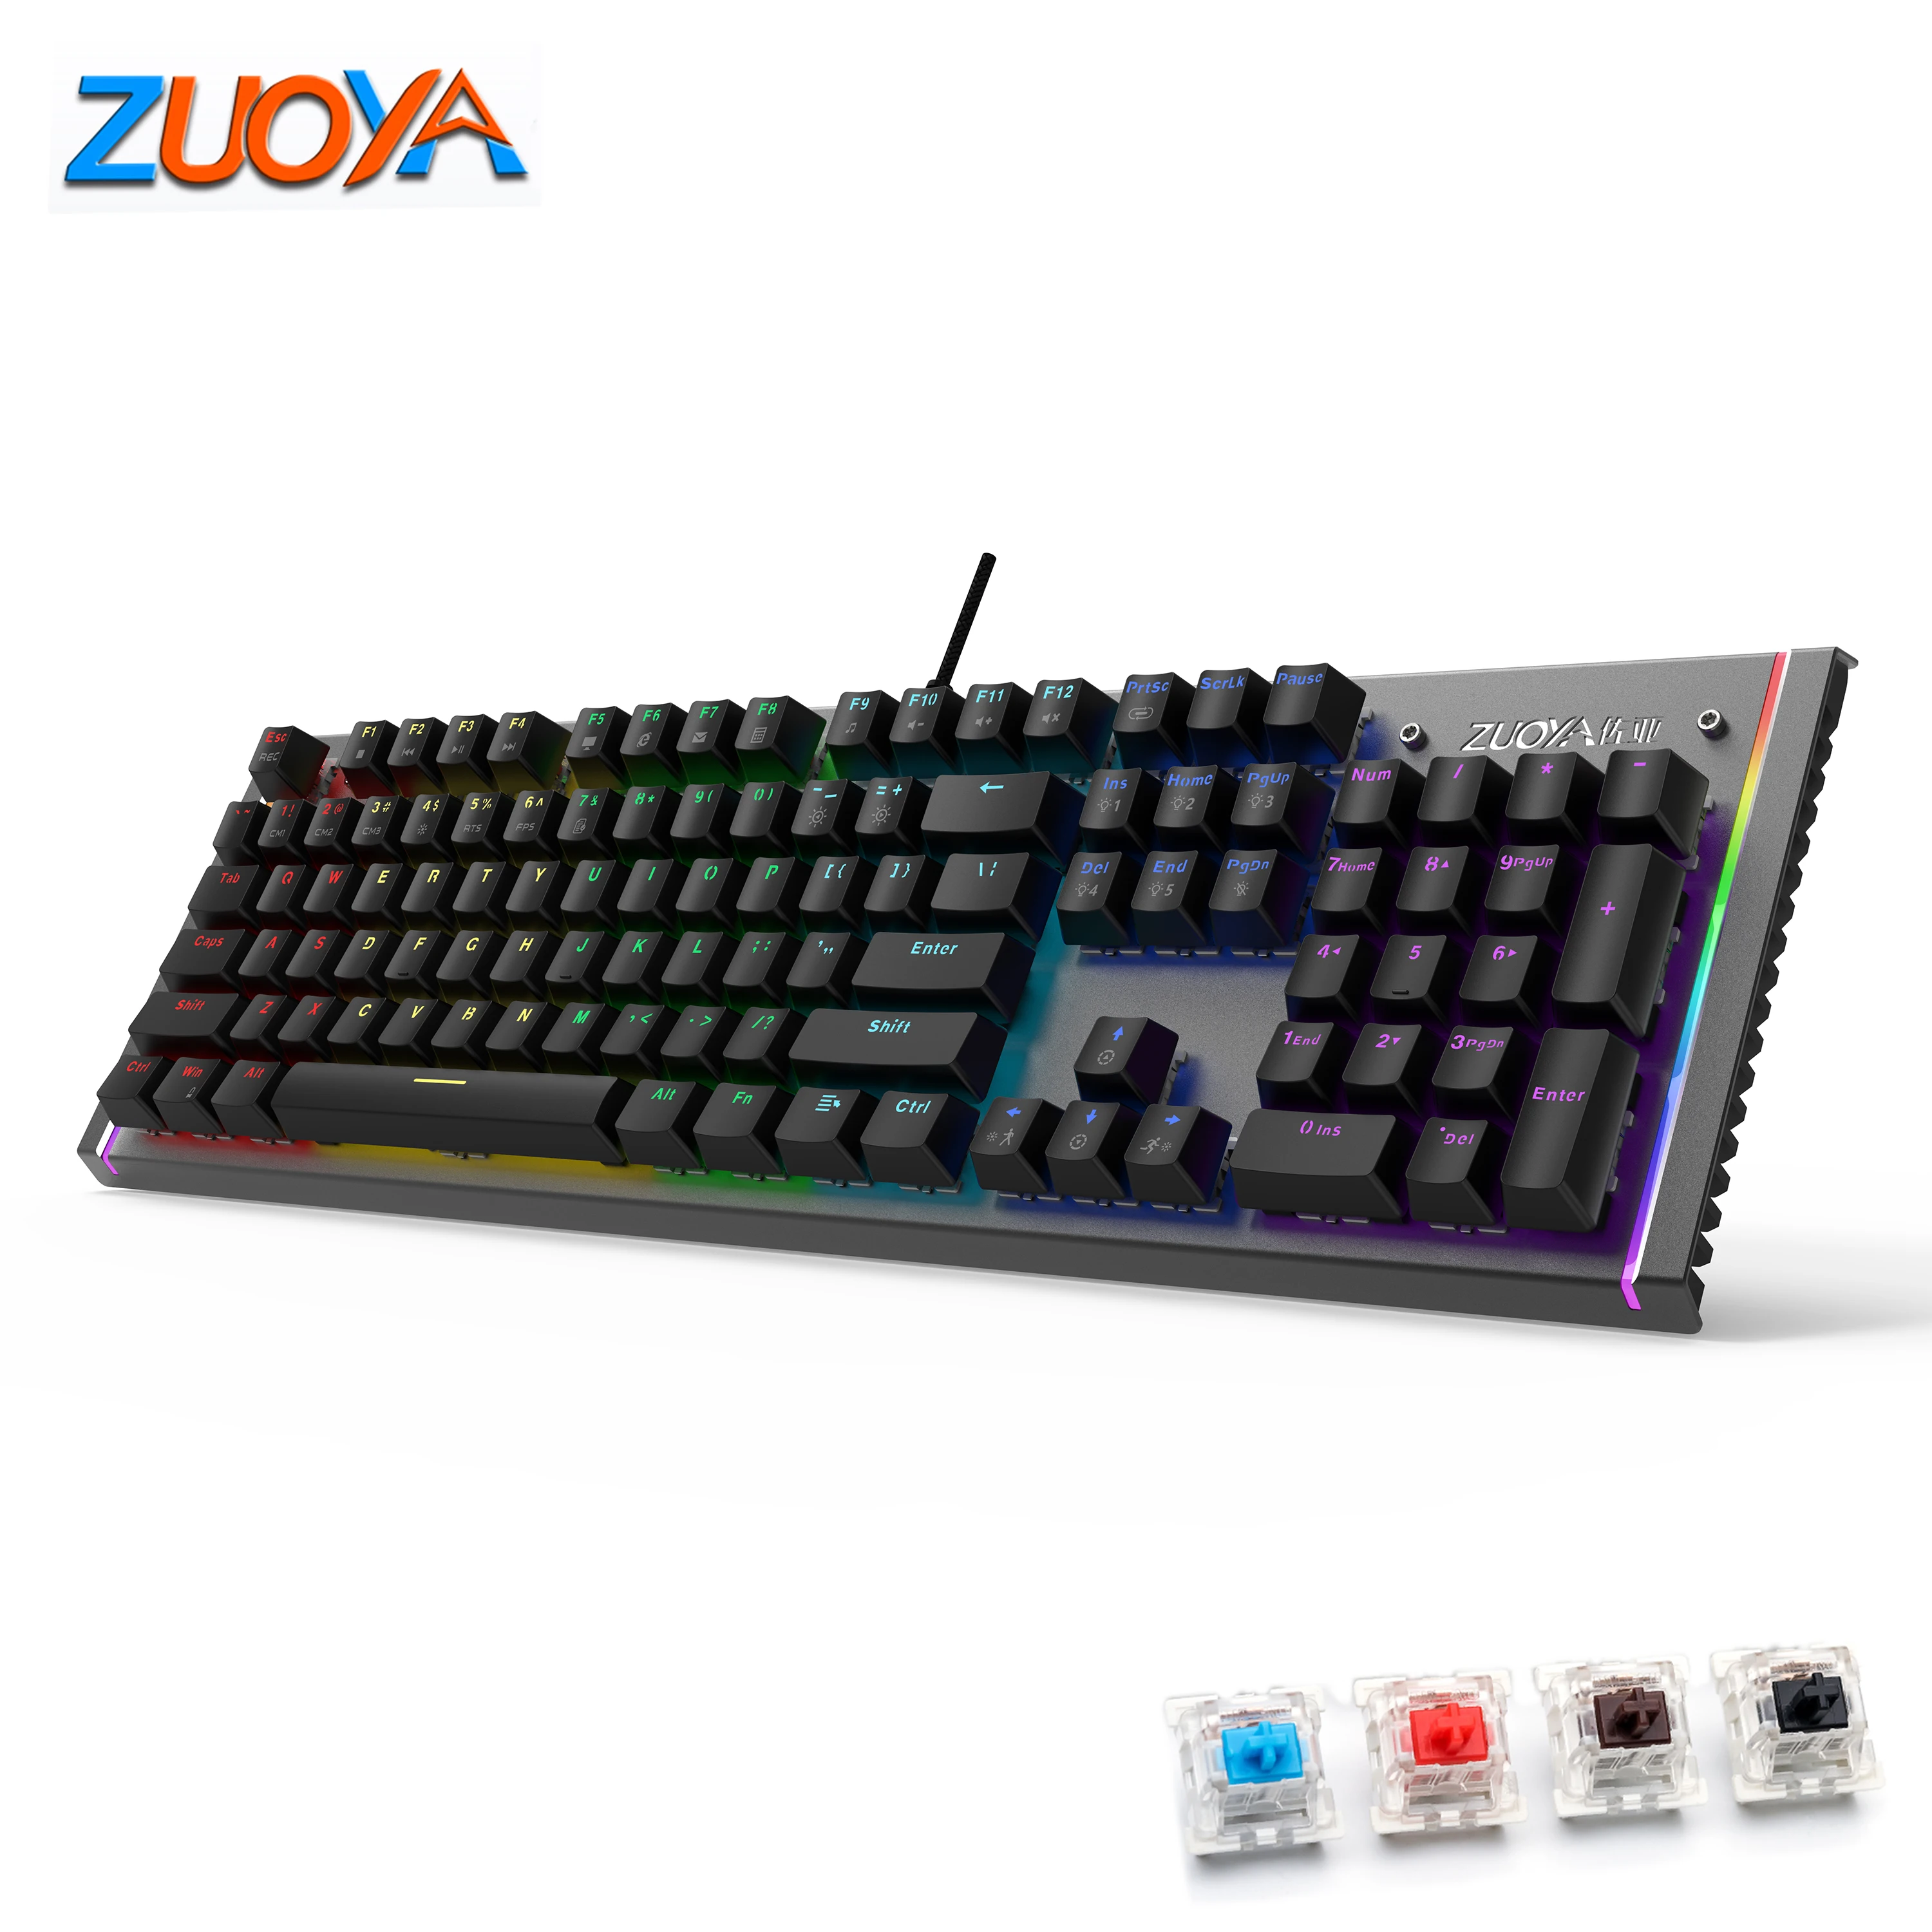 Фото ZUOYA X61 Wired Gaming Mechanical Keyboard RGB Mix Backlit Anti-ghosting Blue Red Switch For Game Laptop PC Russian US | Компьютеры и